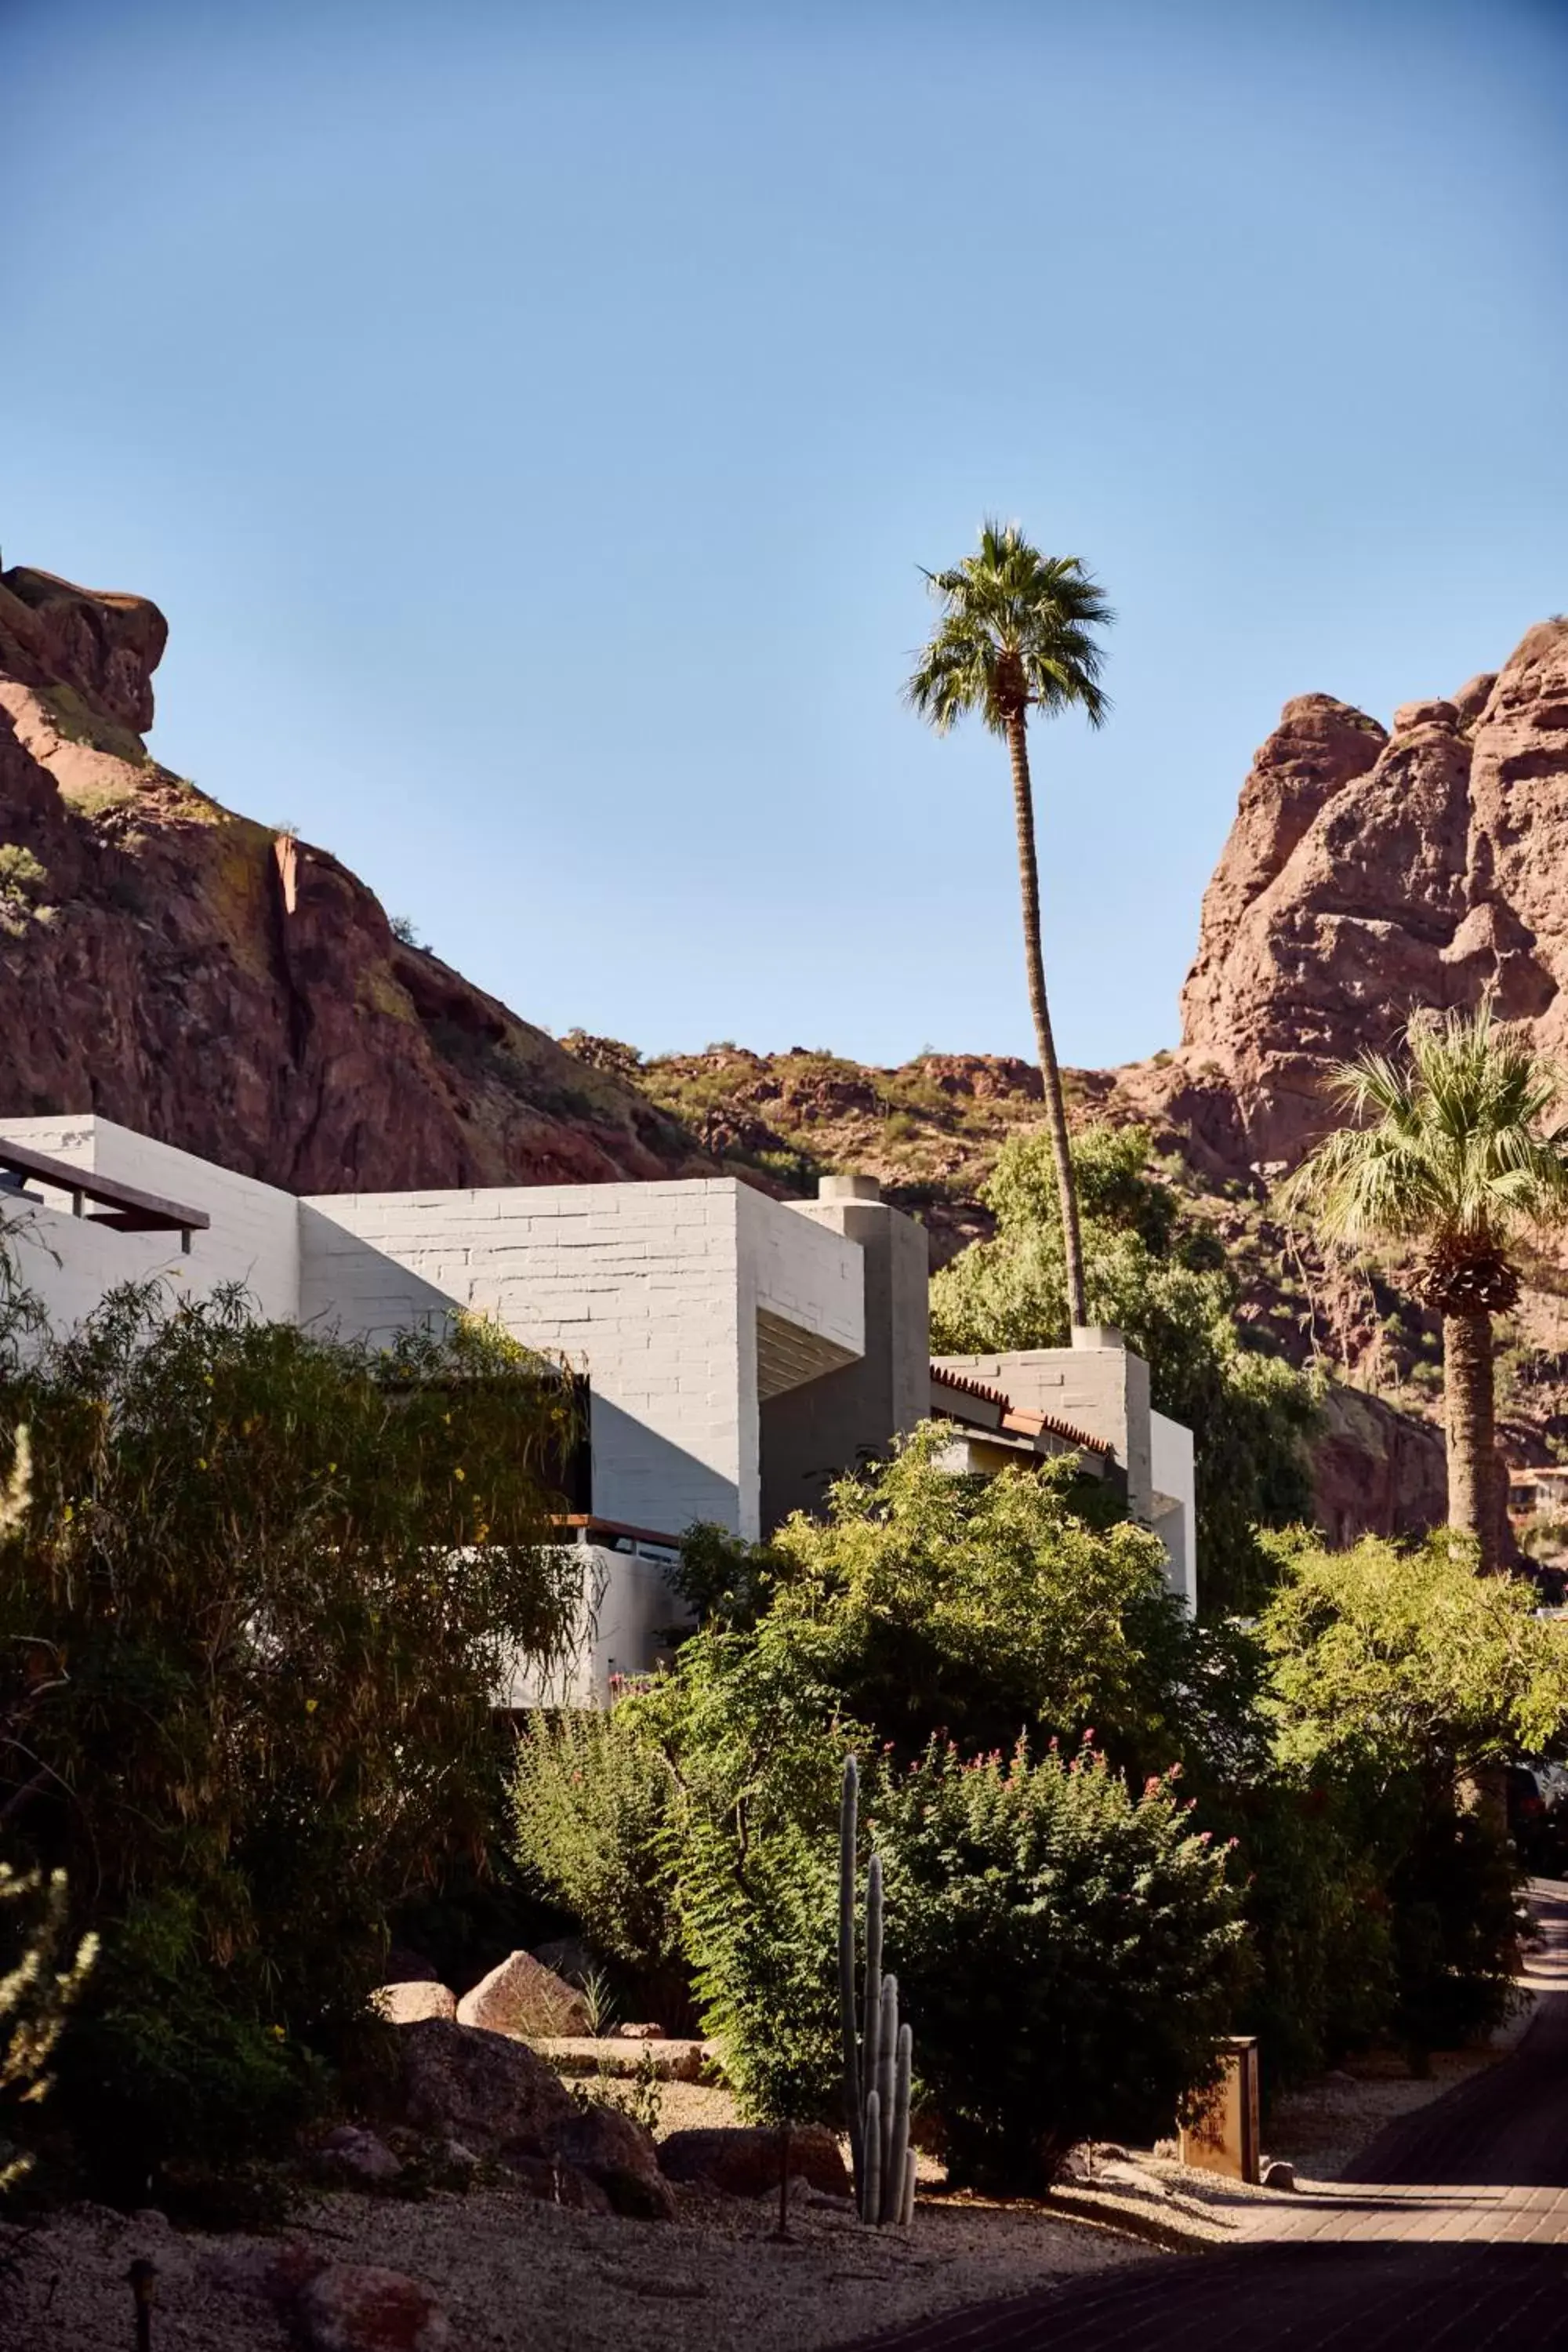 Property building in Sanctuary Camelback Mountain, A Gurney's Resort and Spa